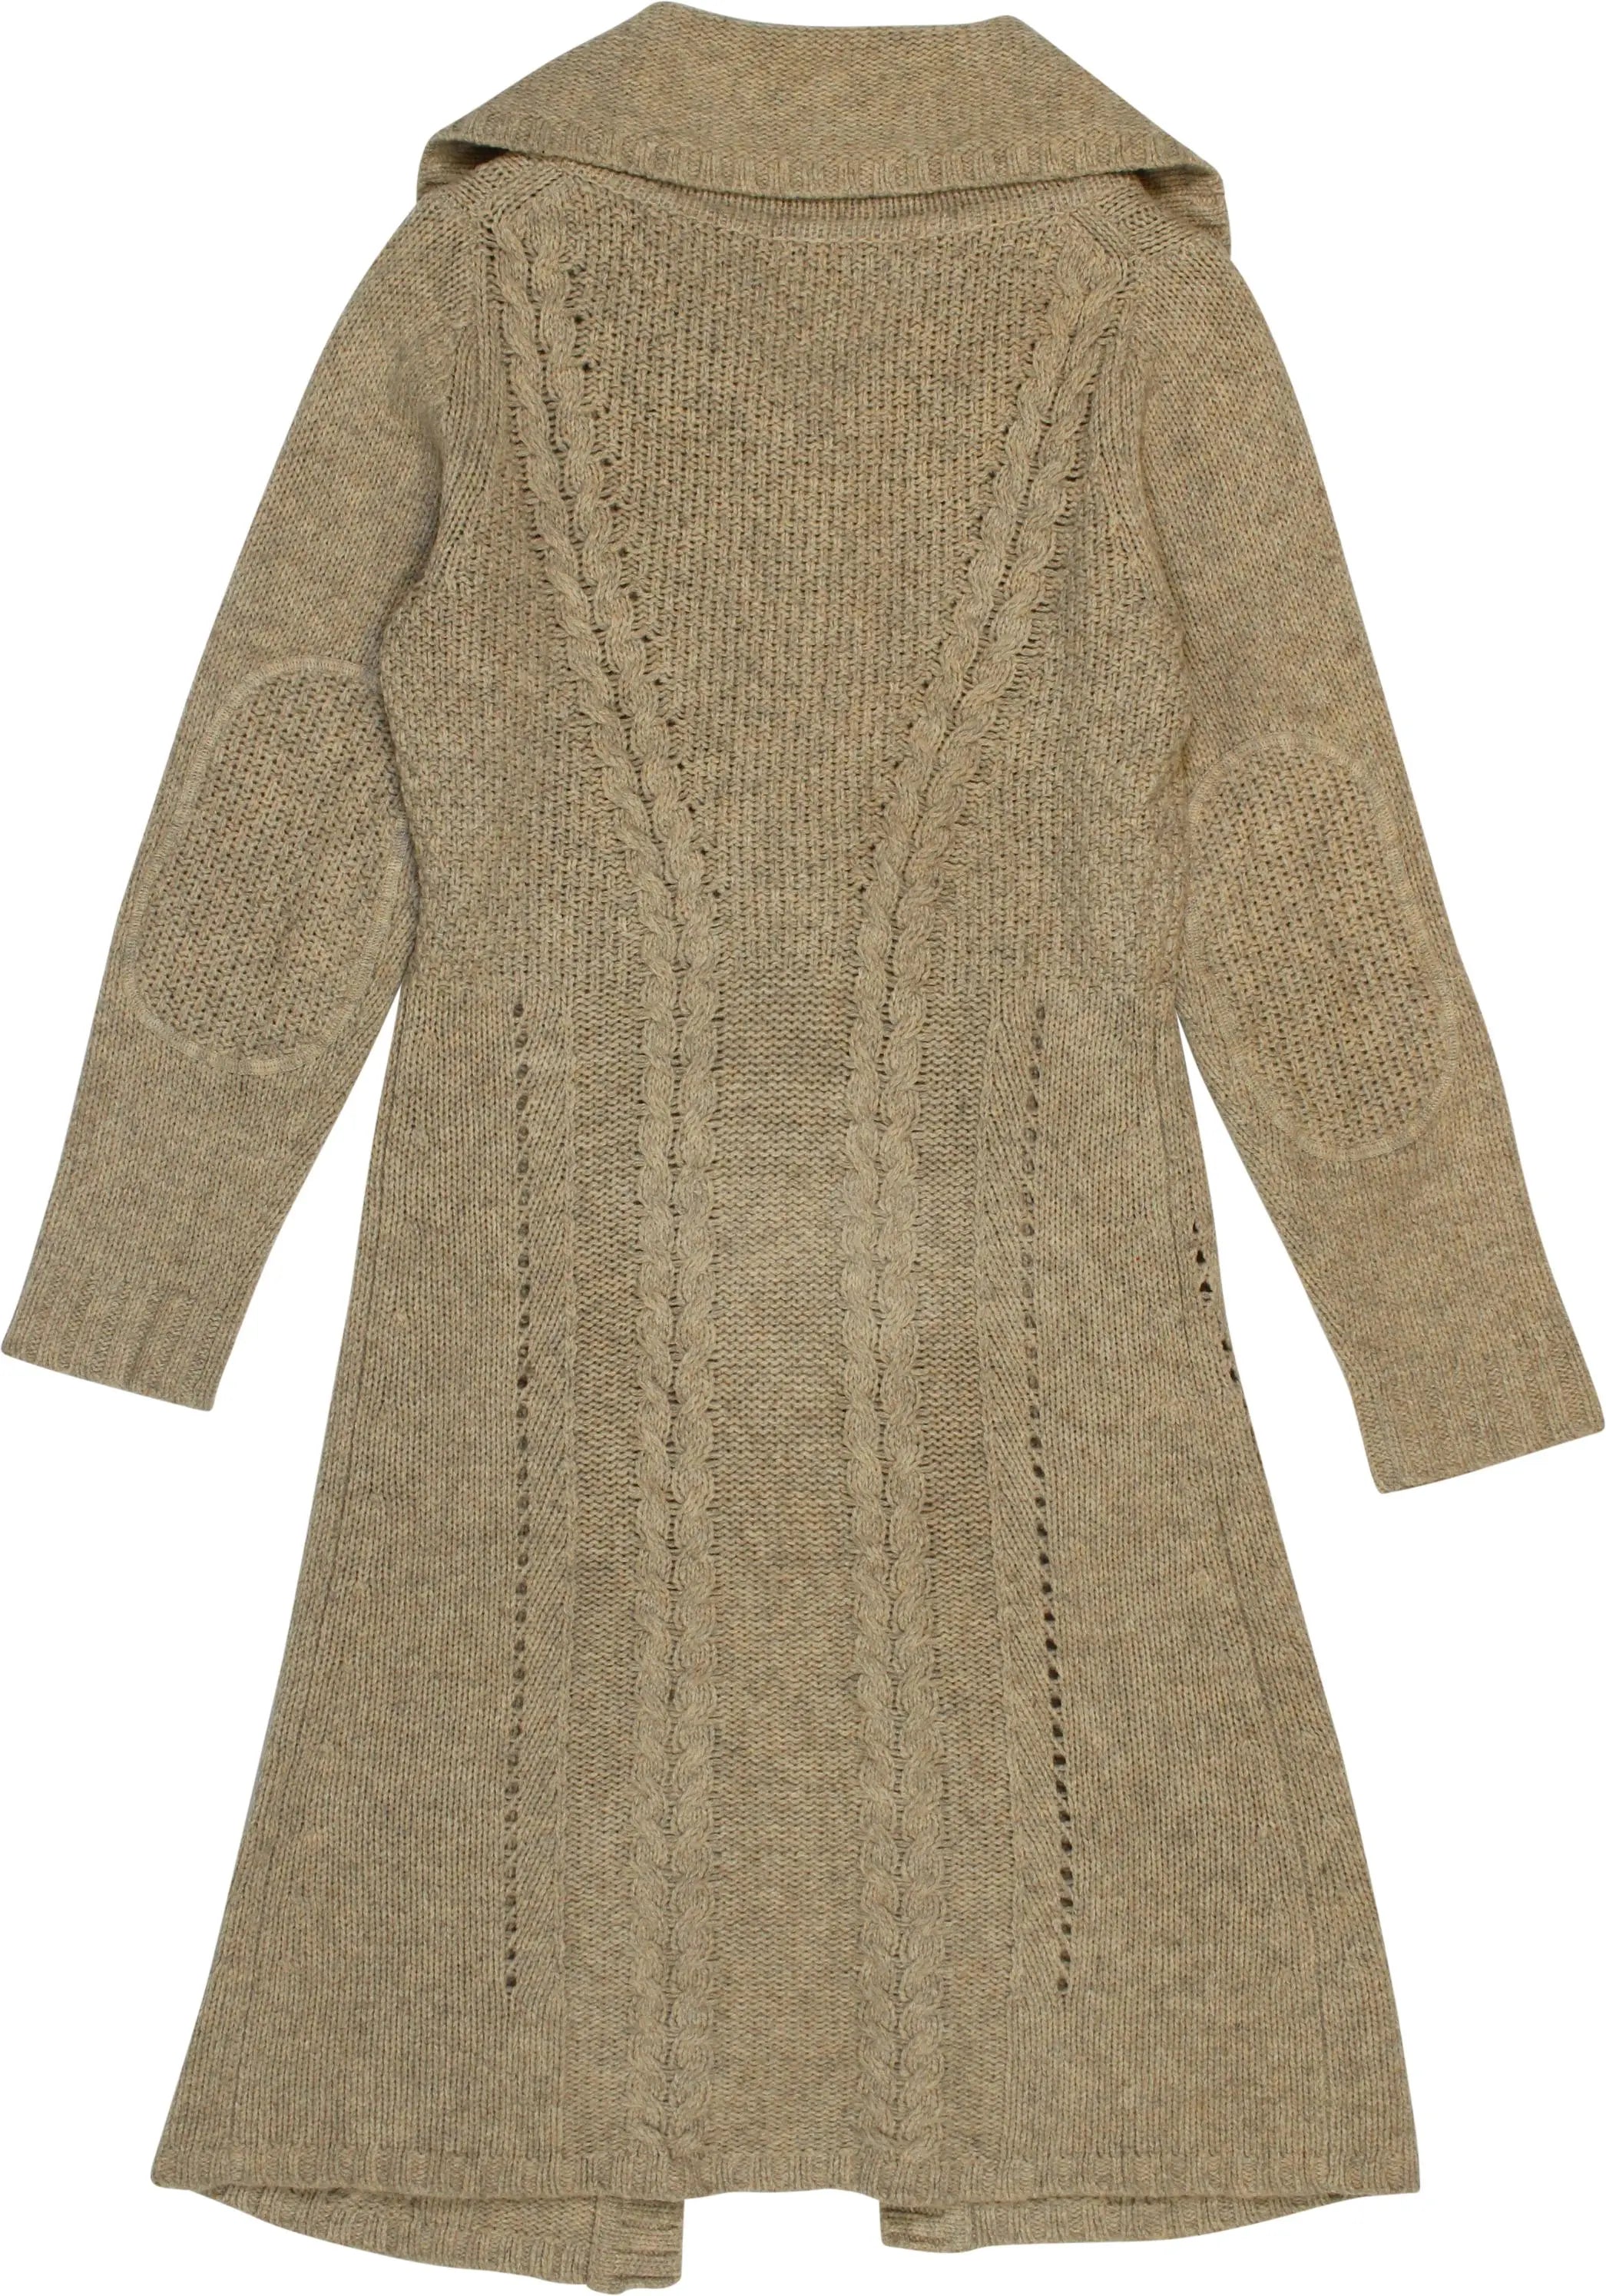 The Barn - Beige Knitted Cardigan- ThriftTale.com - Vintage and second handclothing